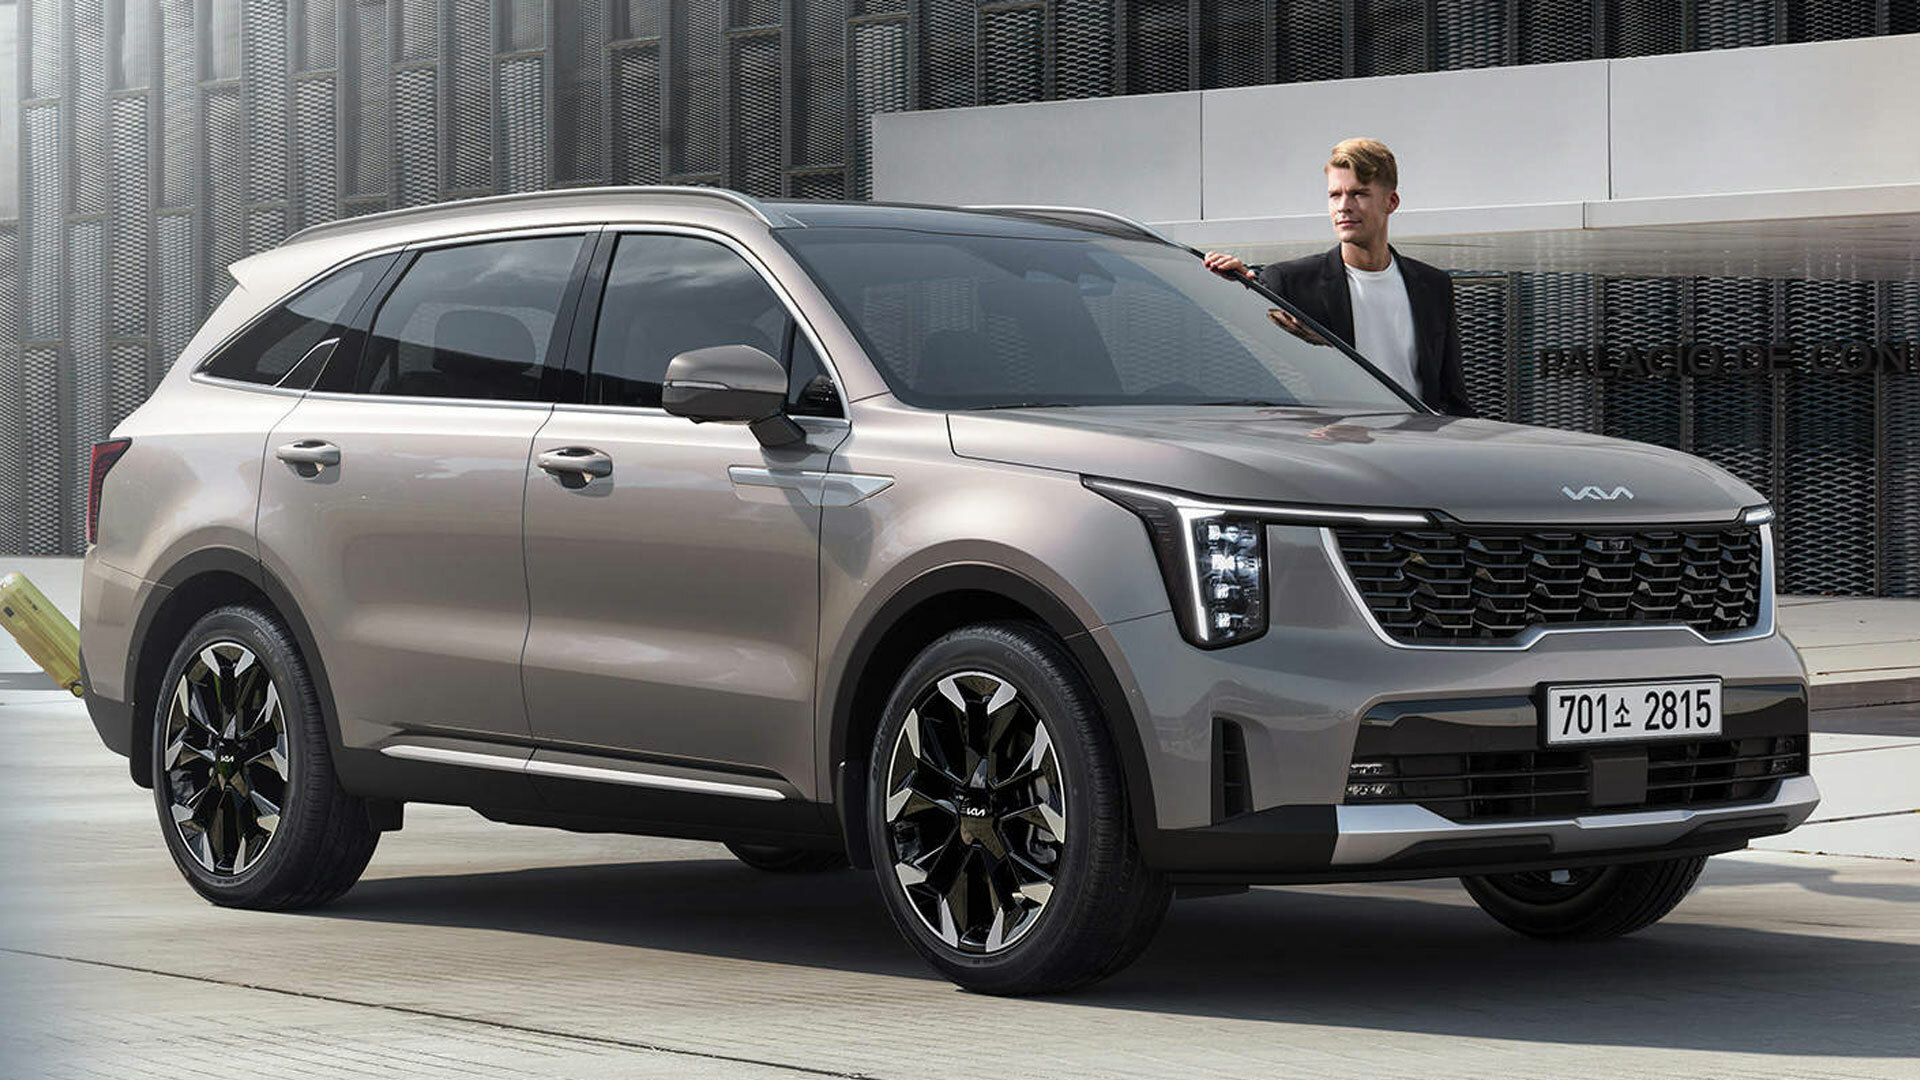 2025 Kia Sorento To Debut Its New Face And Interior For America At